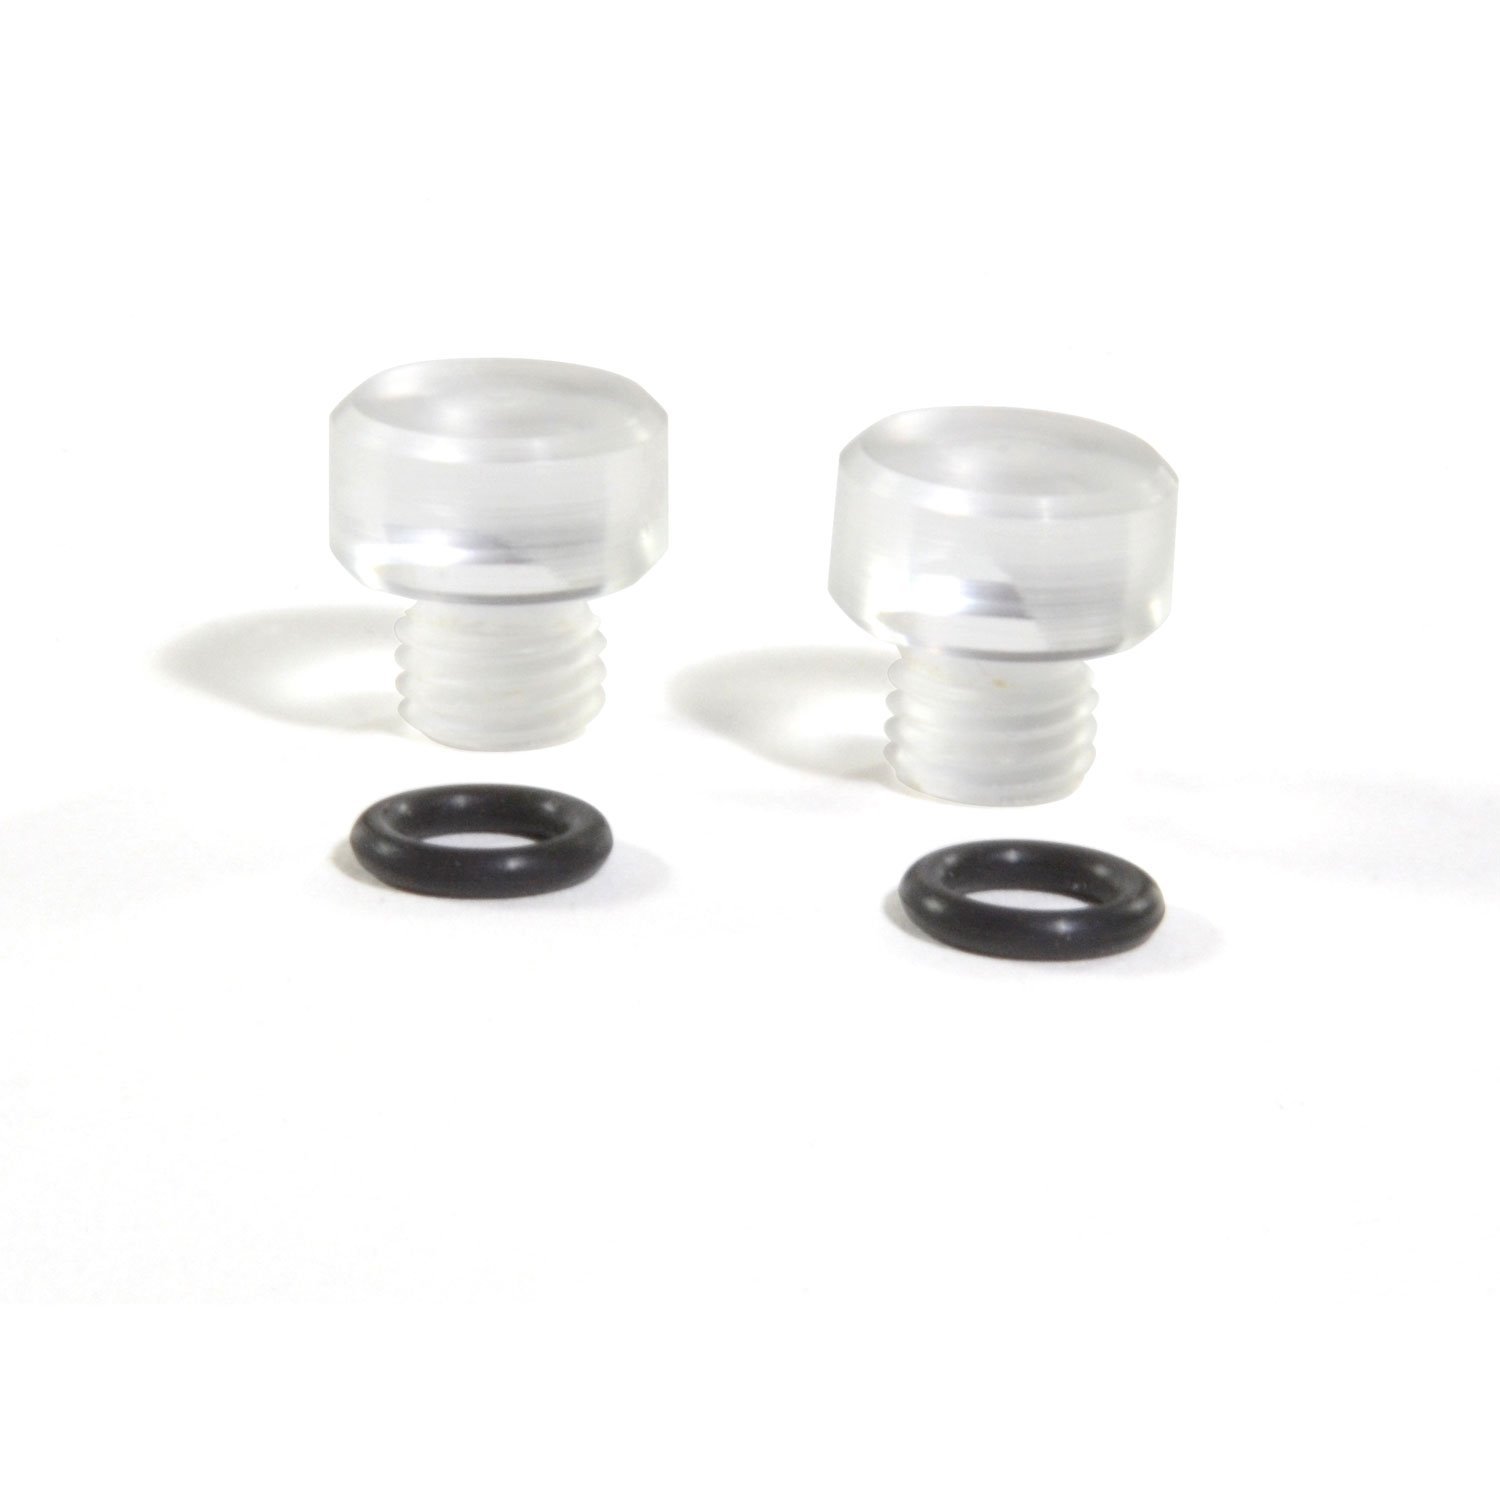 Clear-View Sight Plugs For Holley Carburetor Fuel Bowls